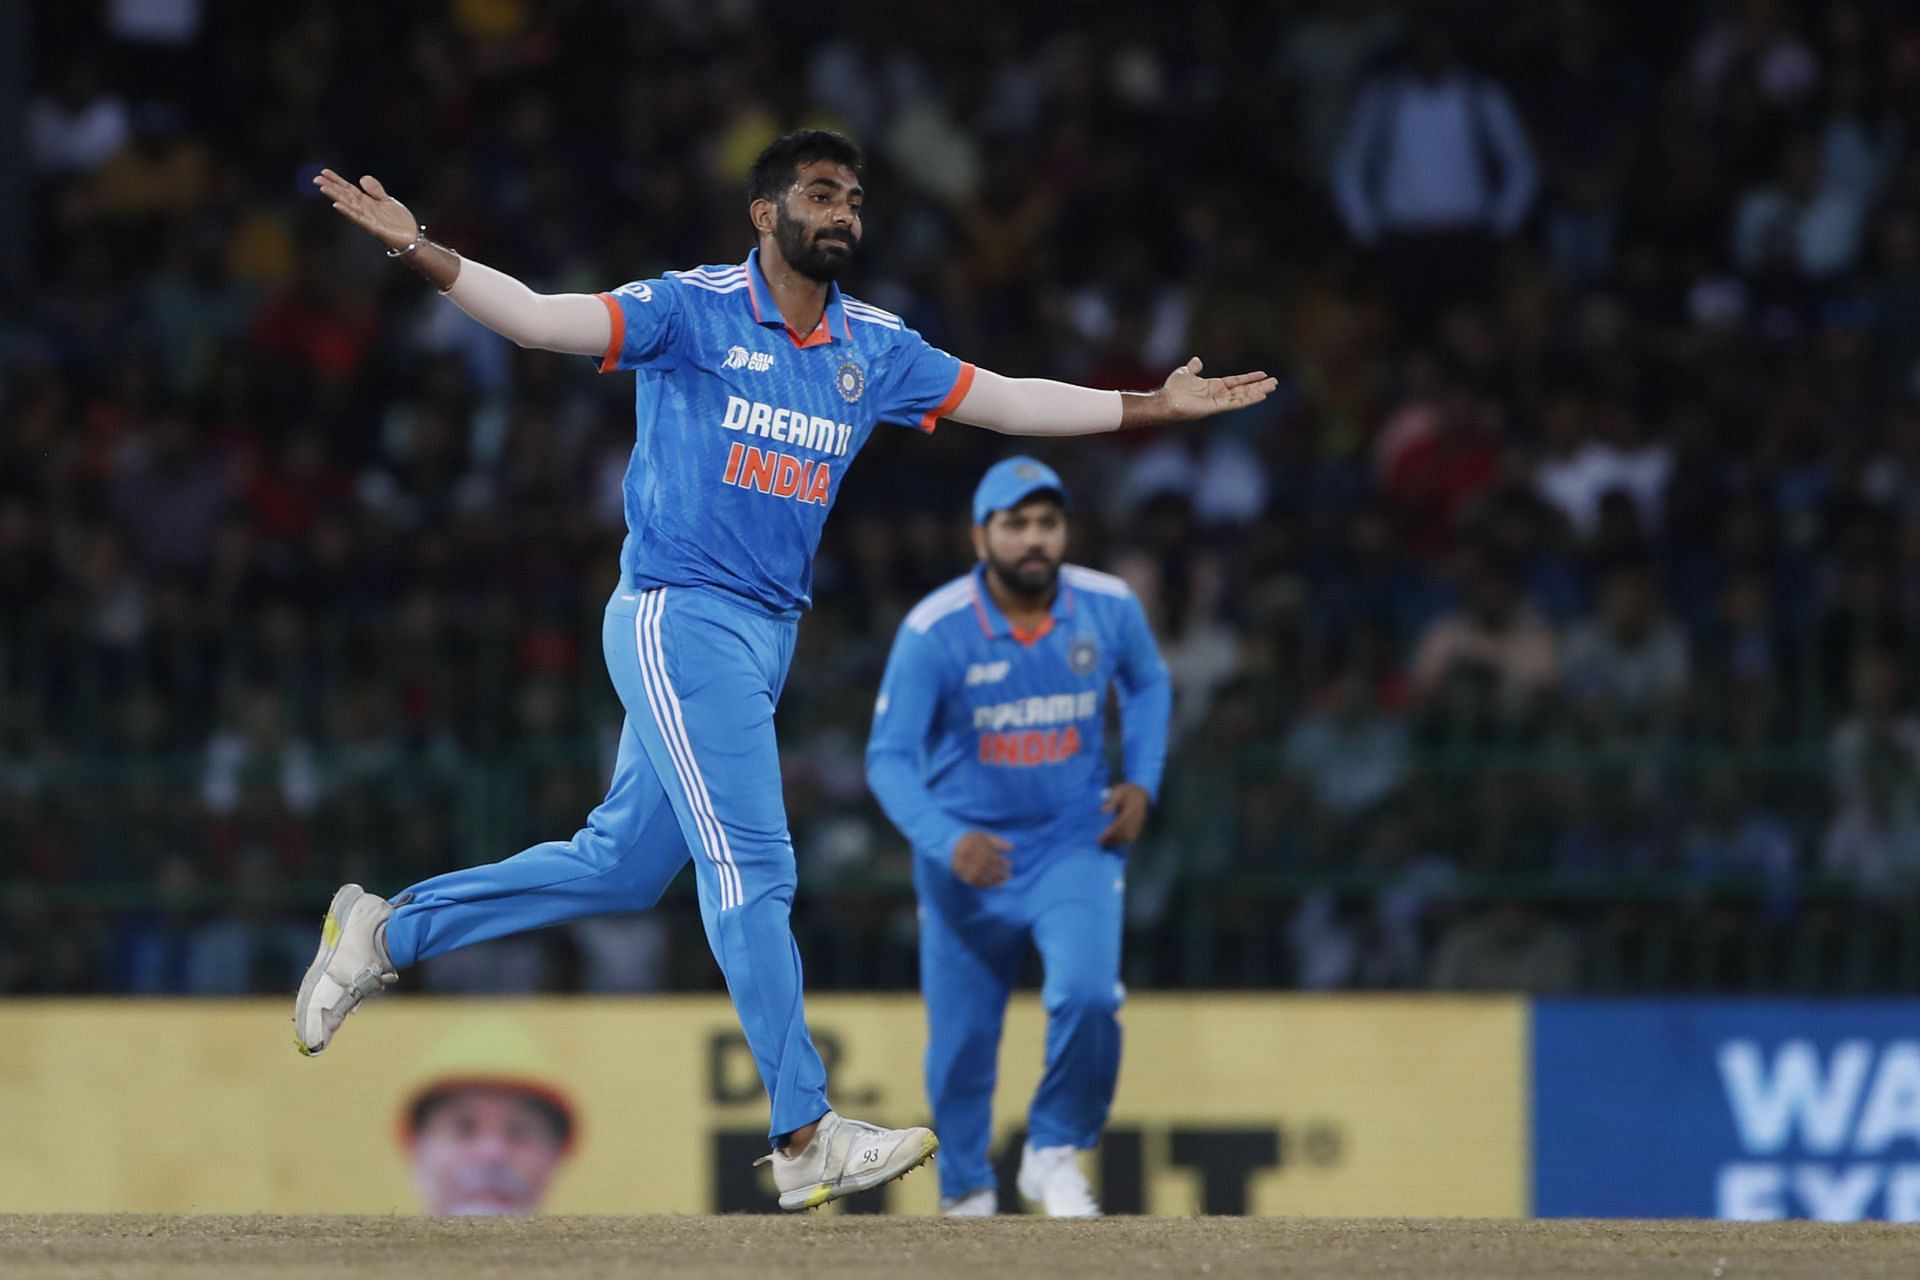 Jasprit Bumrah celebrates picking a wicket for India.